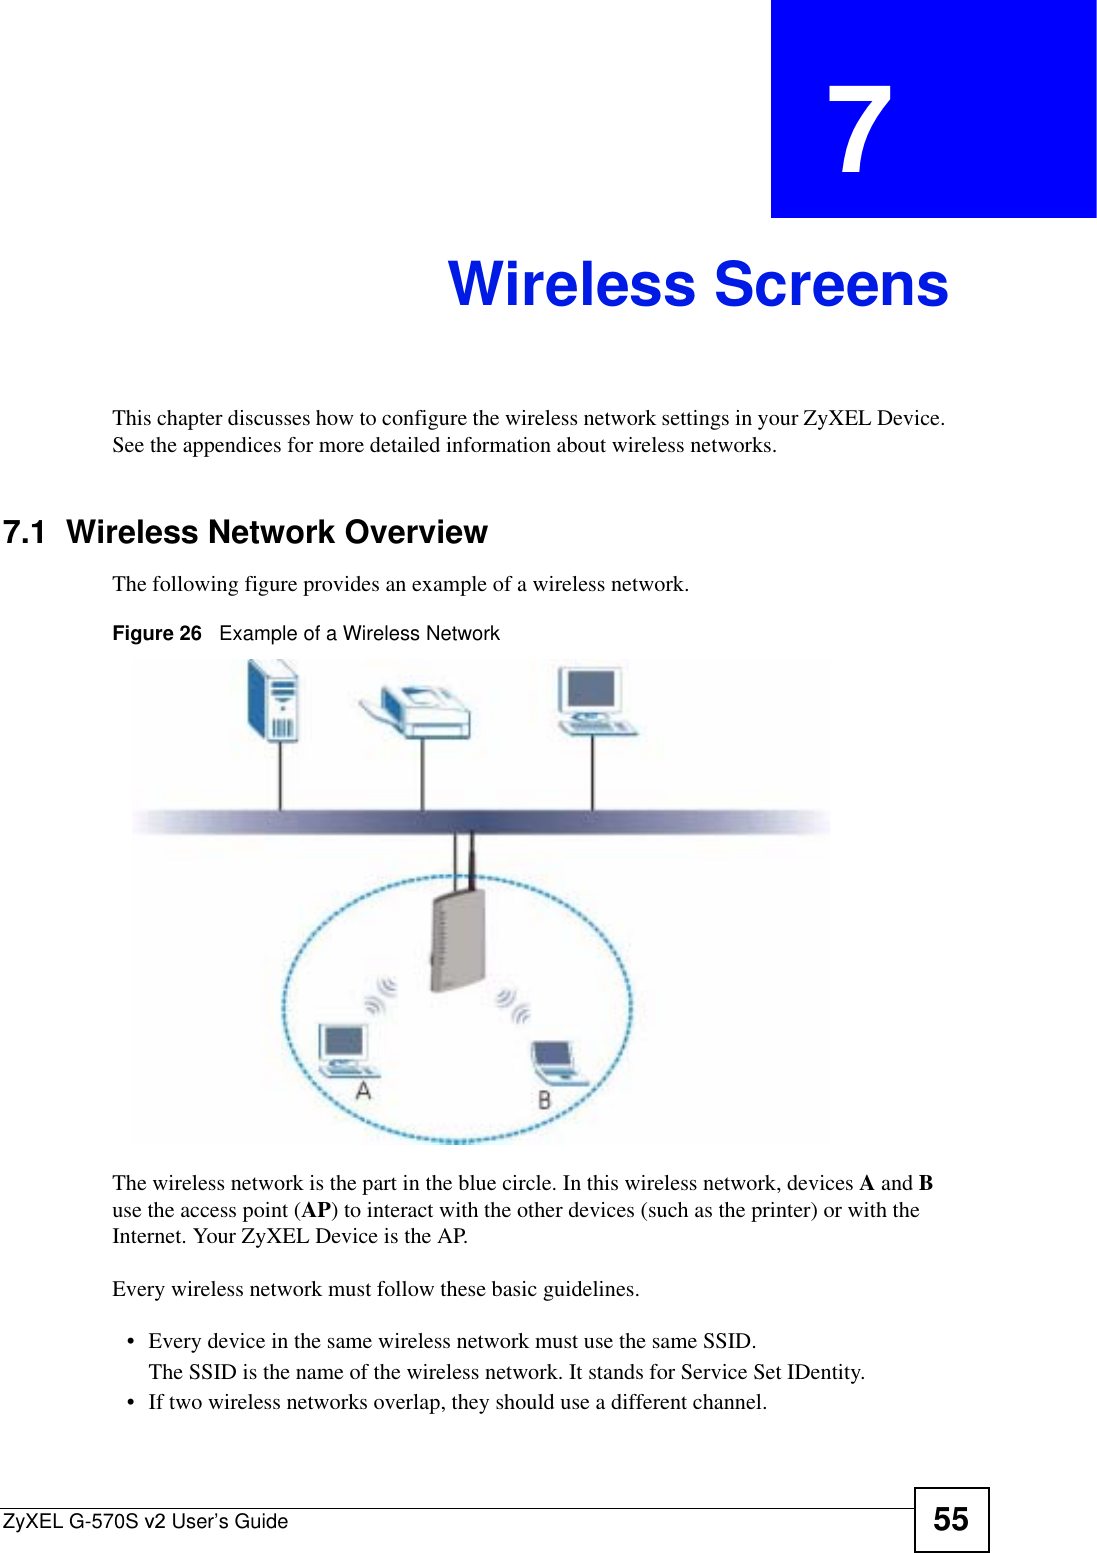 ZyXEL G-570S v2 User’s Guide 55CHAPTER  7 Wireless ScreensThis chapter discusses how to configure the wireless network settings in your ZyXEL Device. See the appendices for more detailed information about wireless networks. 7.1  Wireless Network OverviewThe following figure provides an example of a wireless network.Figure 26   Example of a Wireless NetworkThe wireless network is the part in the blue circle. In this wireless network, devices A and Buse the access point (AP) to interact with the other devices (such as the printer) or with the Internet. Your ZyXEL Device is the AP.Every wireless network must follow these basic guidelines.• Every device in the same wireless network must use the same SSID.The SSID is the name of the wireless network. It stands for Service Set IDentity.• If two wireless networks overlap, they should use a different channel.